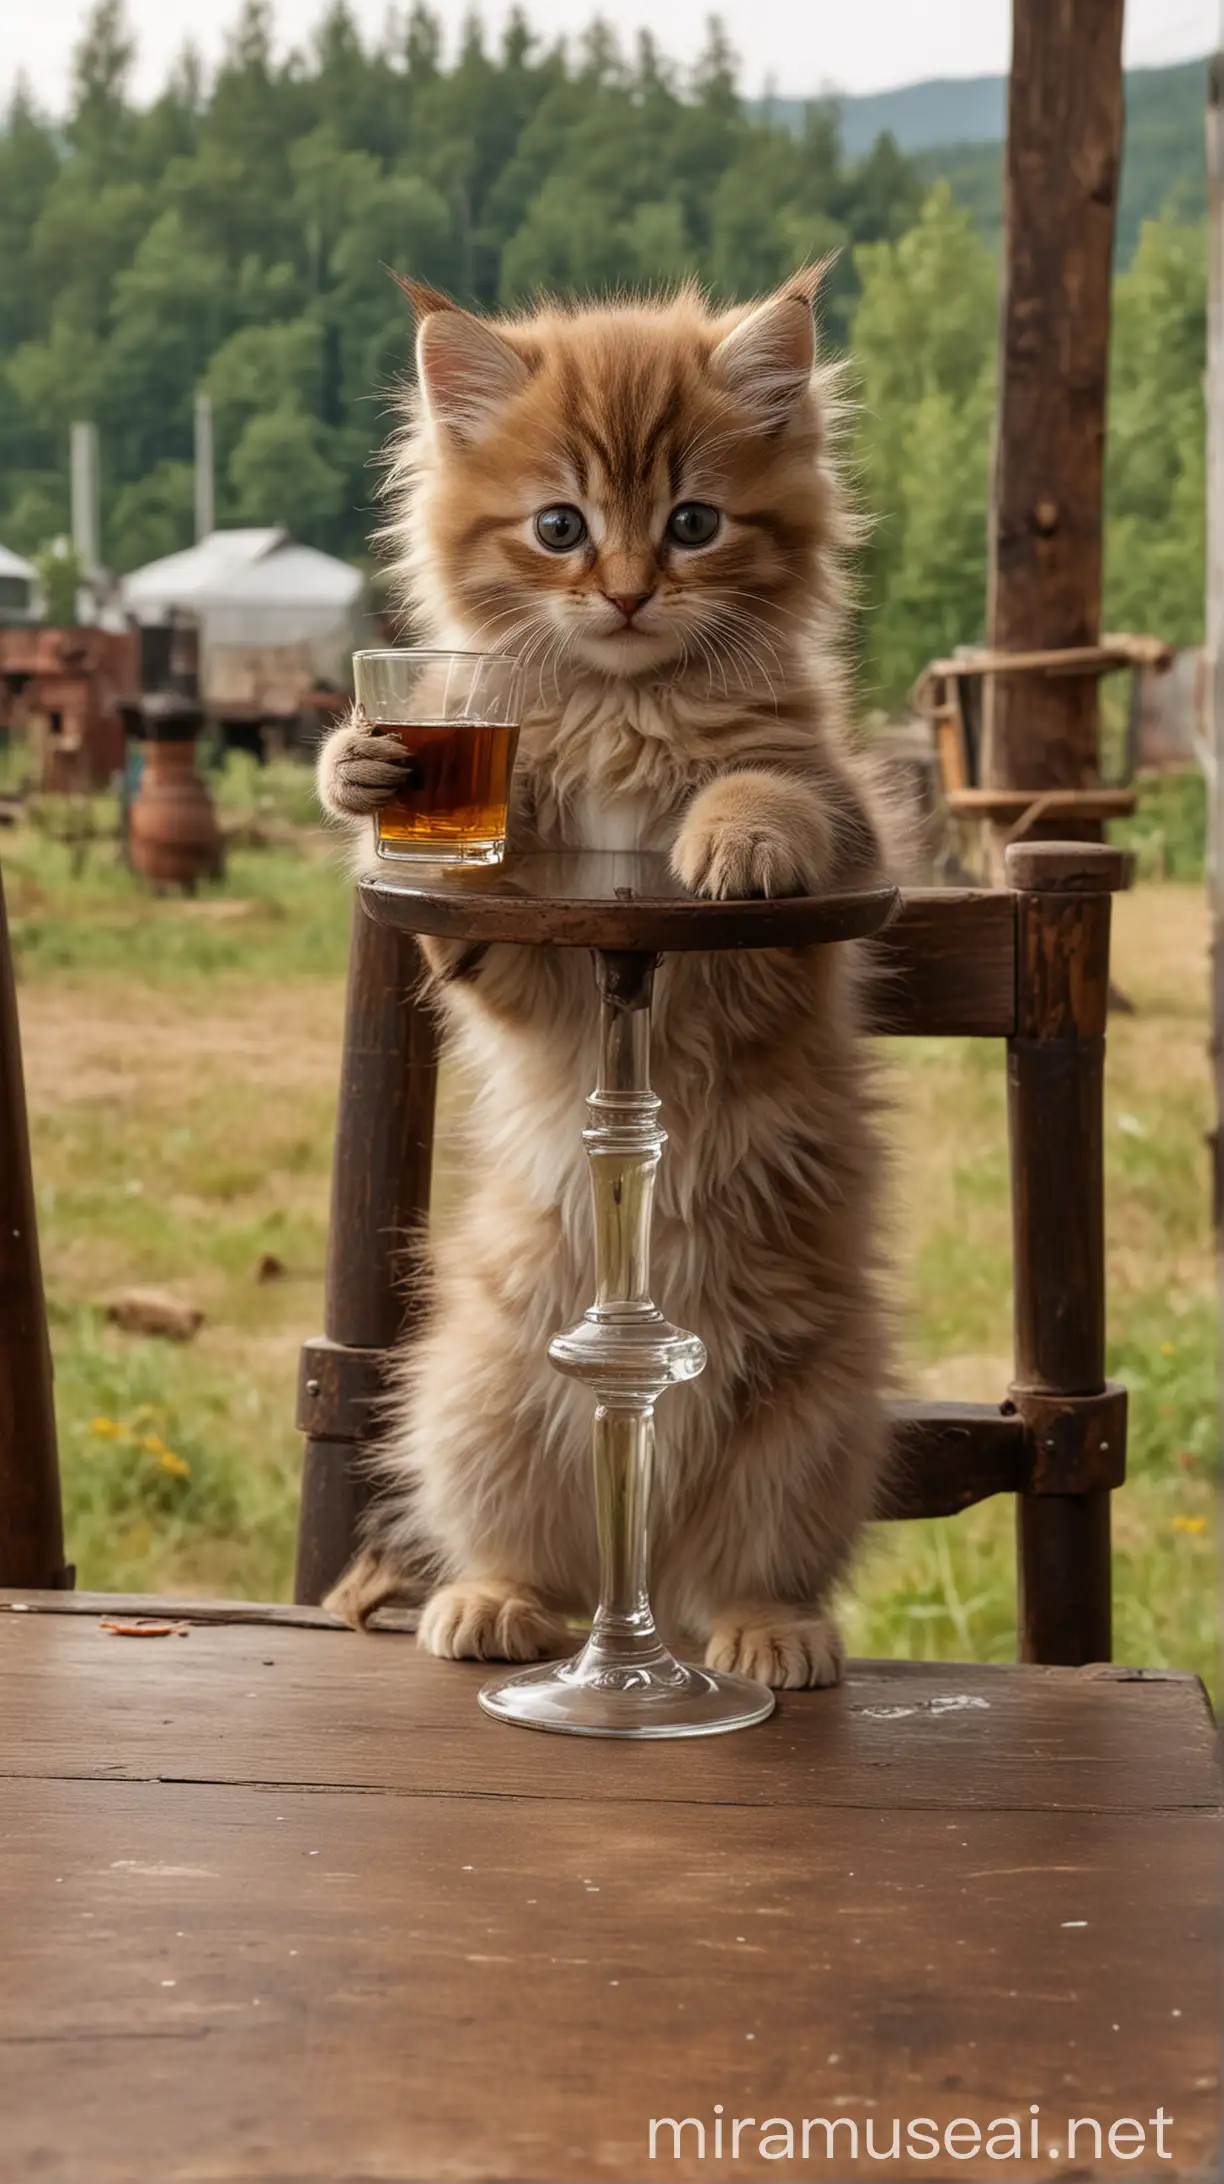 Adorable Kitten Enjoying a Drink Amidst Industrial and Natural Scenery